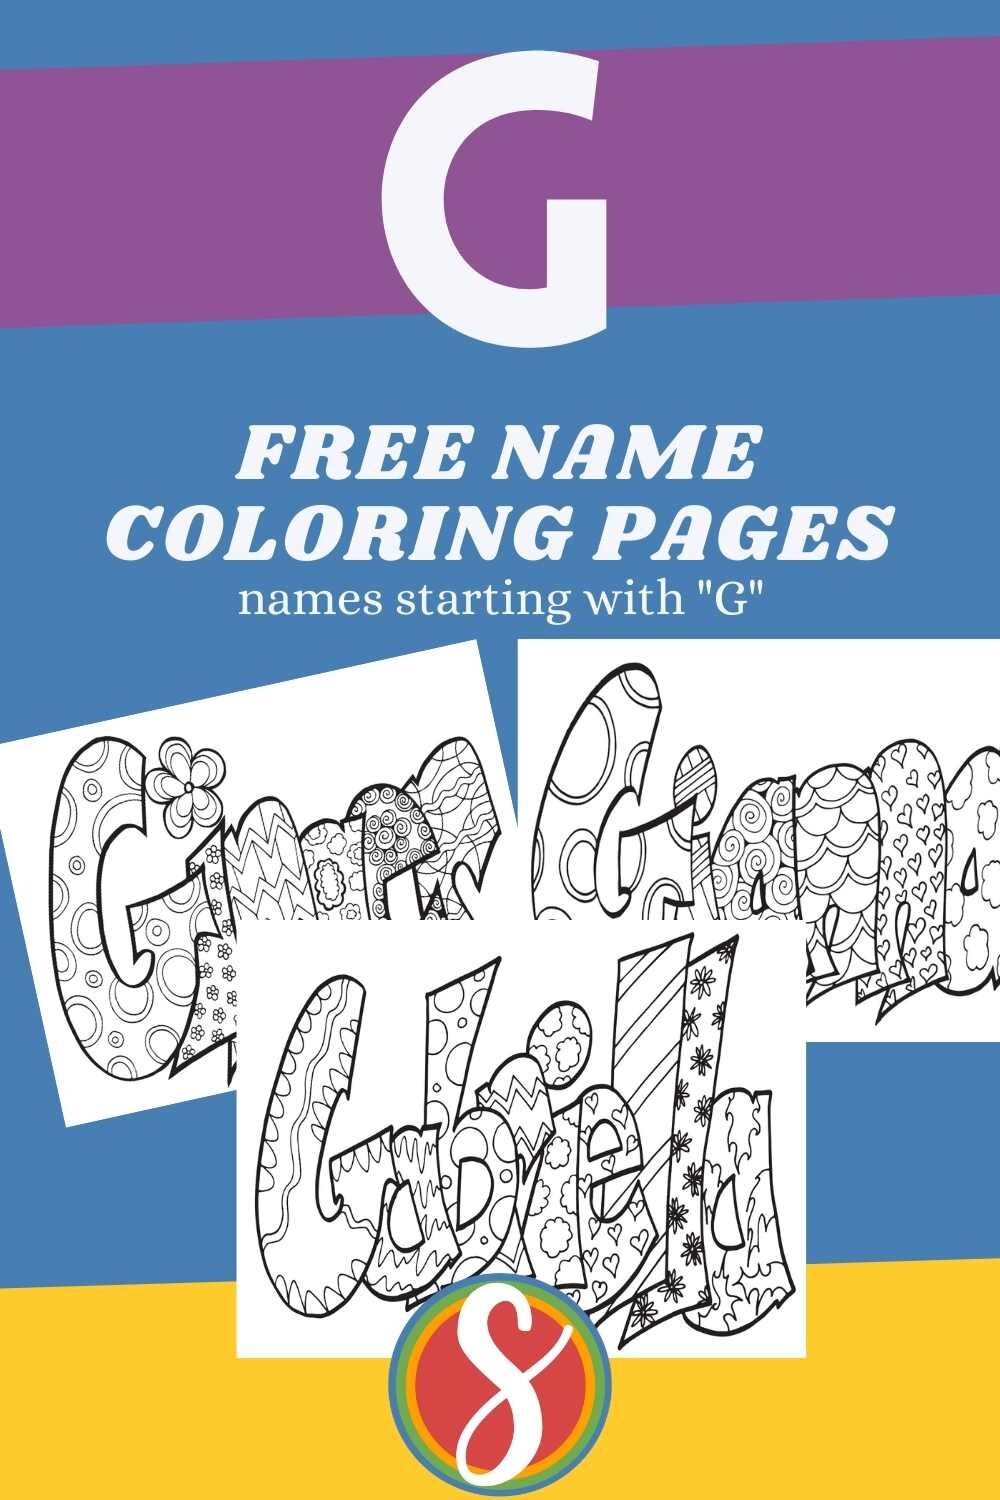 free name coloring pages starts with g.jpg